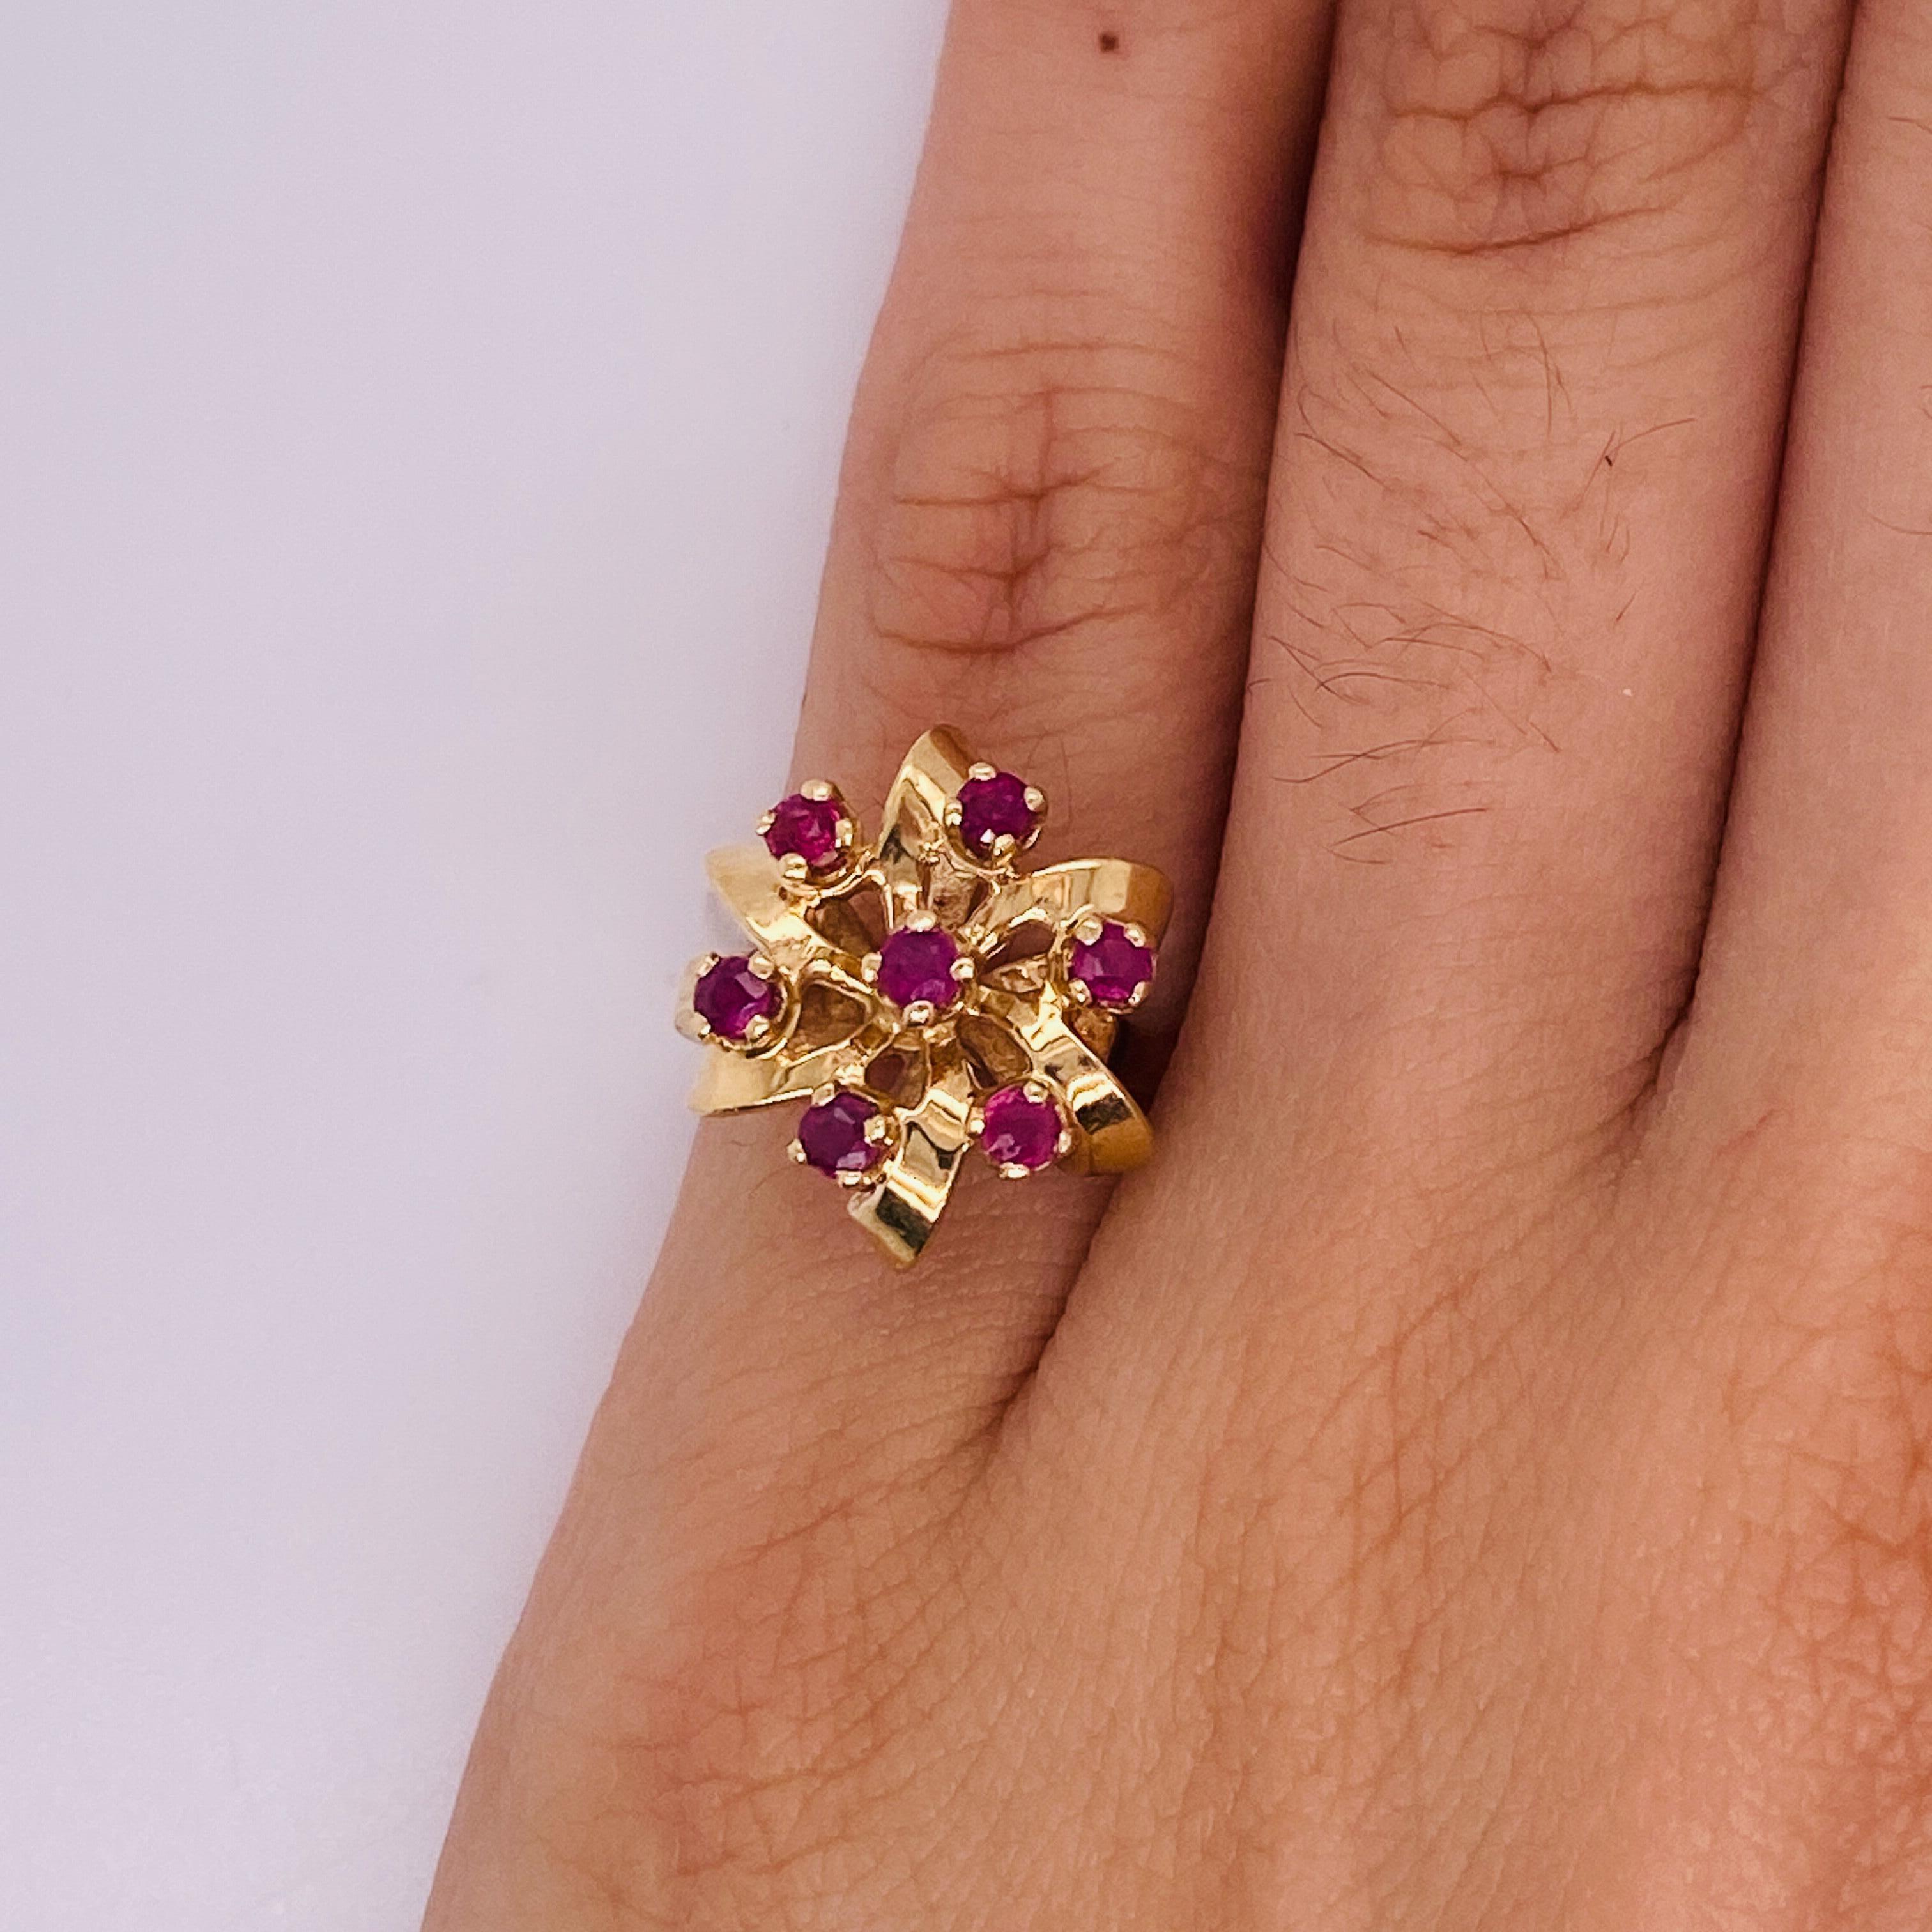 This ring is perfect to crown the hand of someone that you always consider a gift. The domed ribbon ring top wraps a bow around any day or any outfit. The rubies add their richness to the design and make a perfect splash of color to compliment the